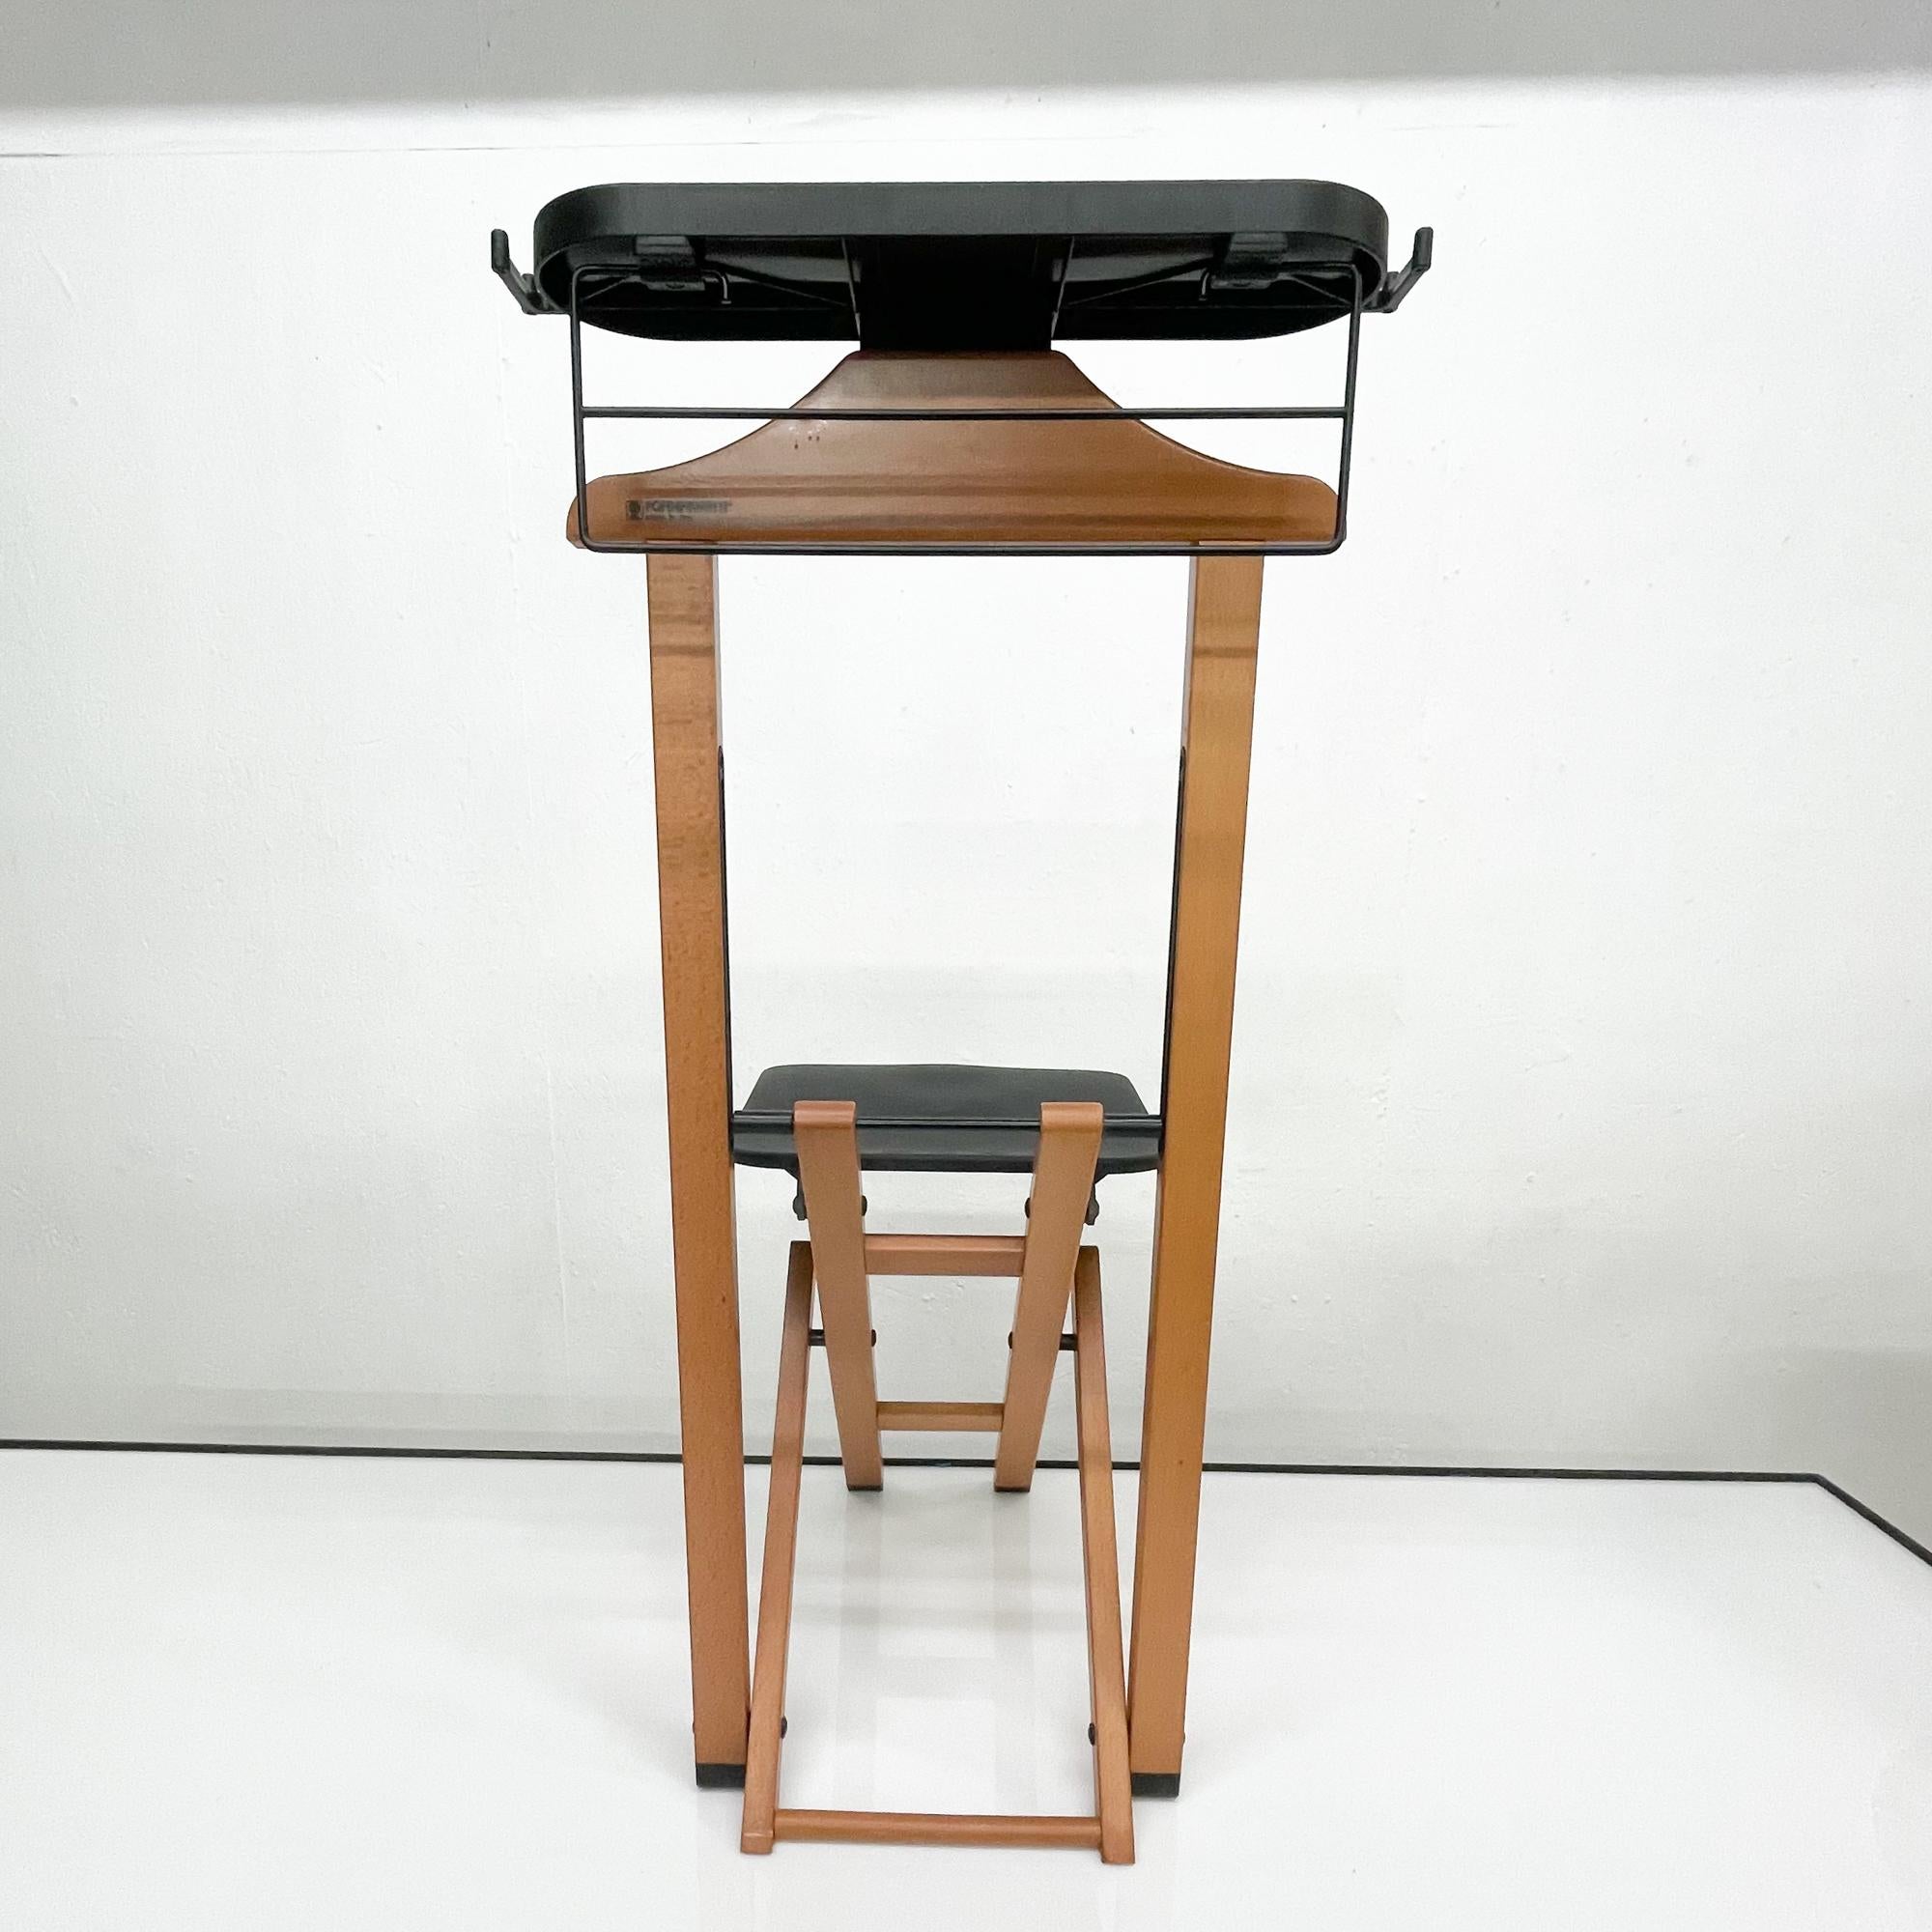 Late 20th Century 1990s Foppapedretti Gentleman's Suit Chair Folding Valet Stand Italy